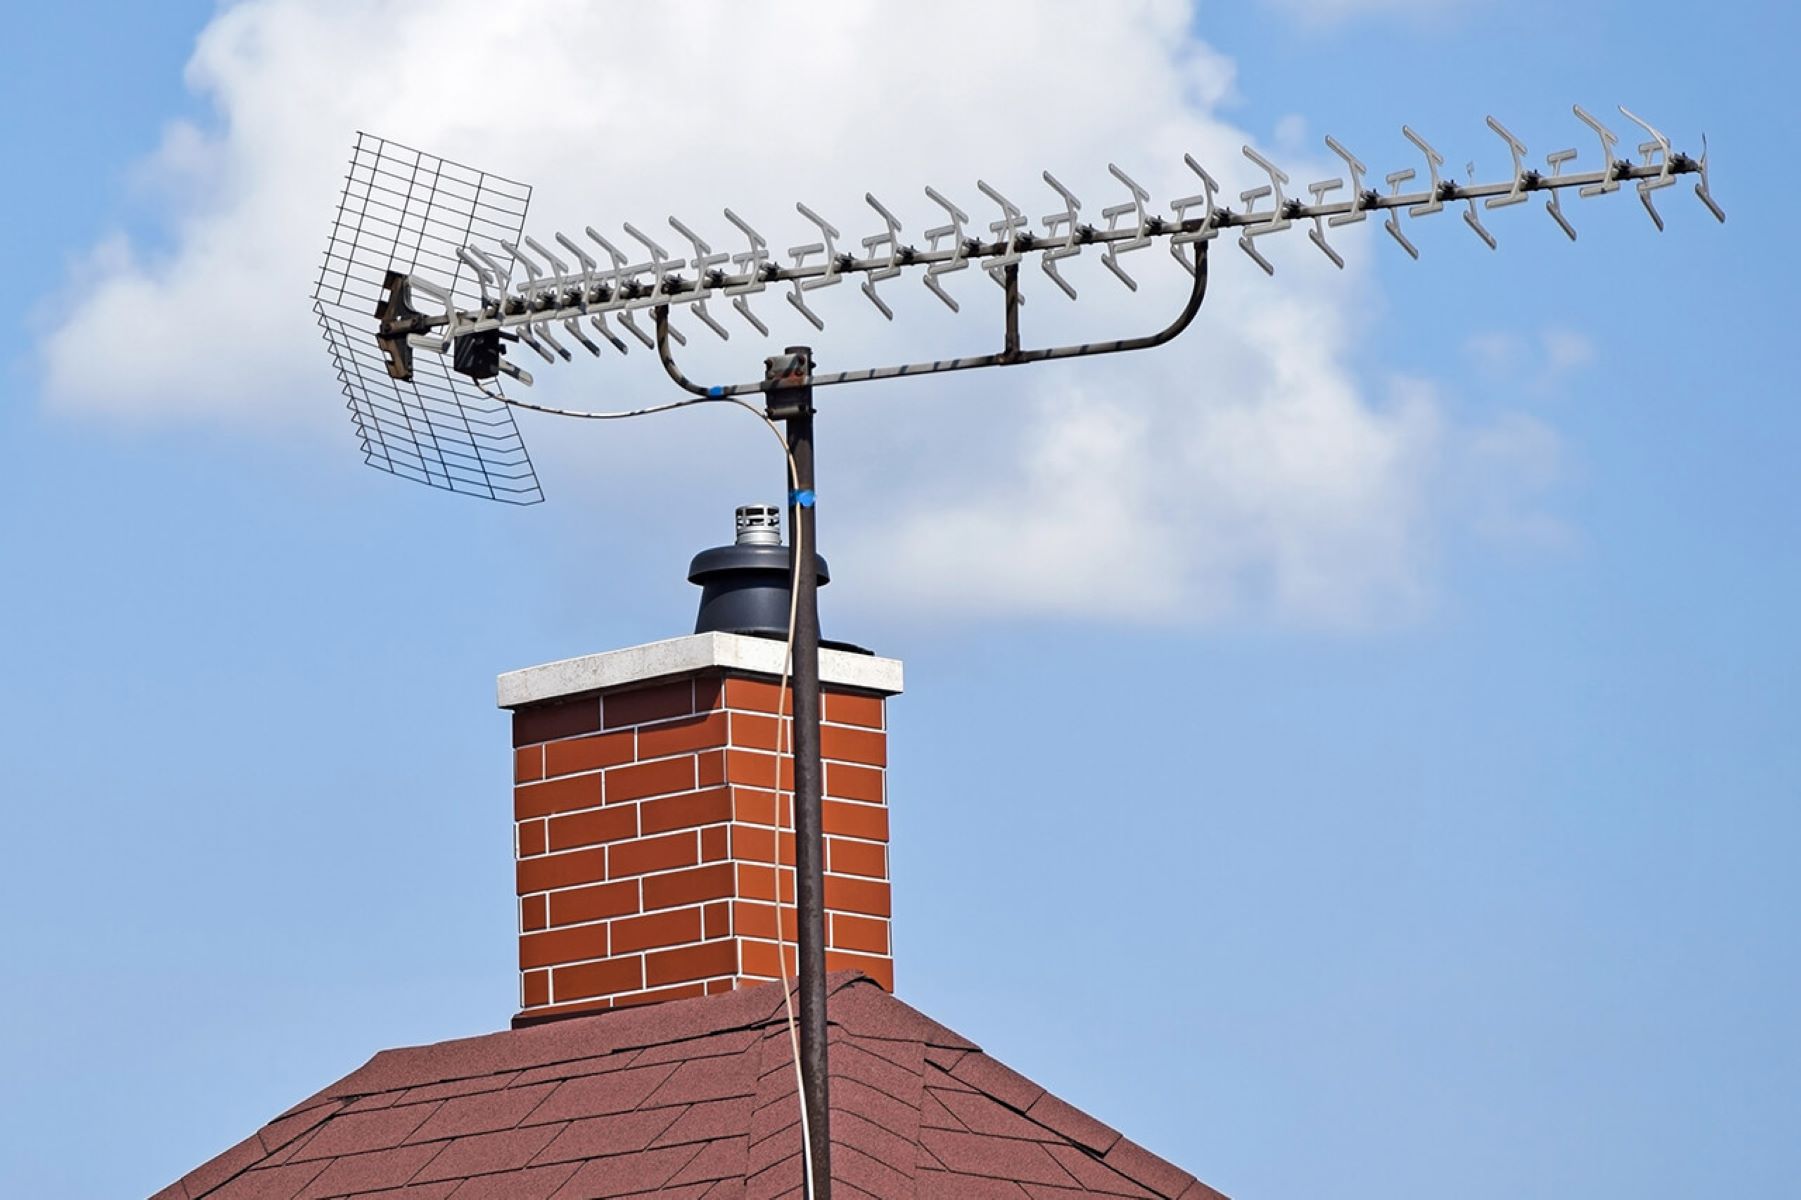 How To Install Tv Antenna On Roof